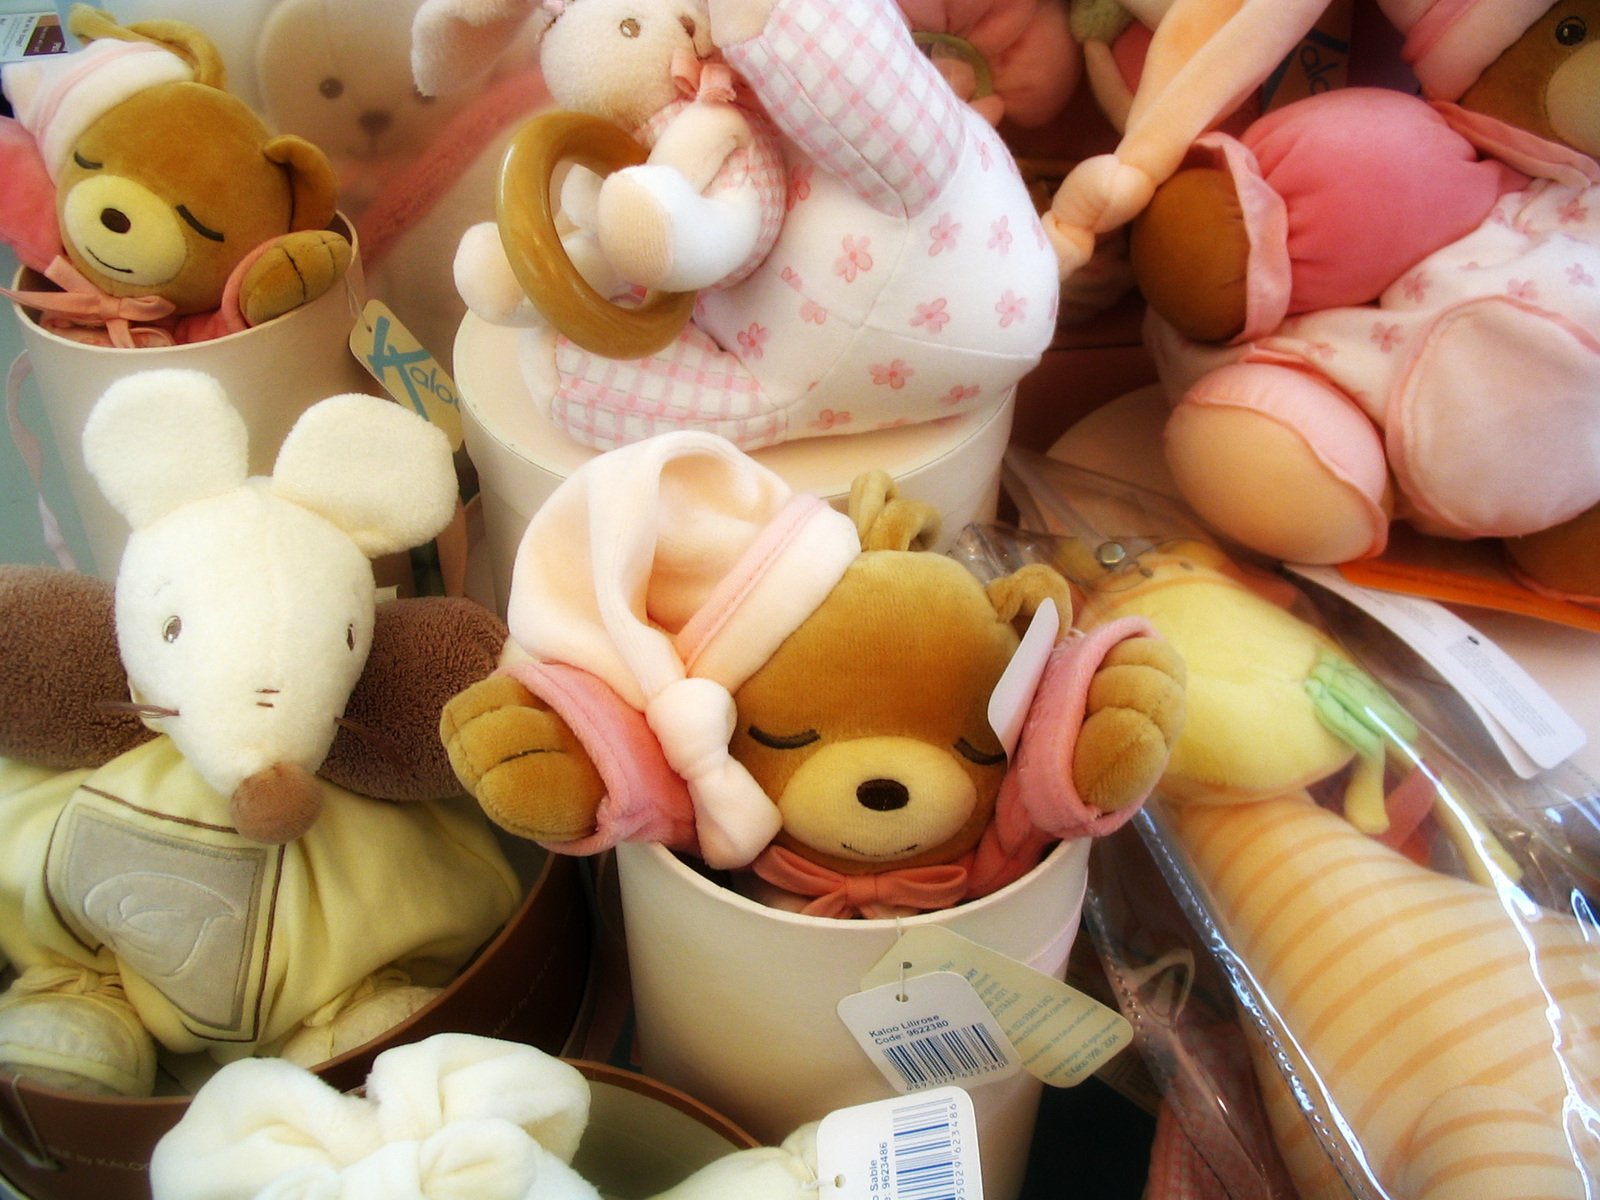 small teddy bears with their mom are sitting in little baskets